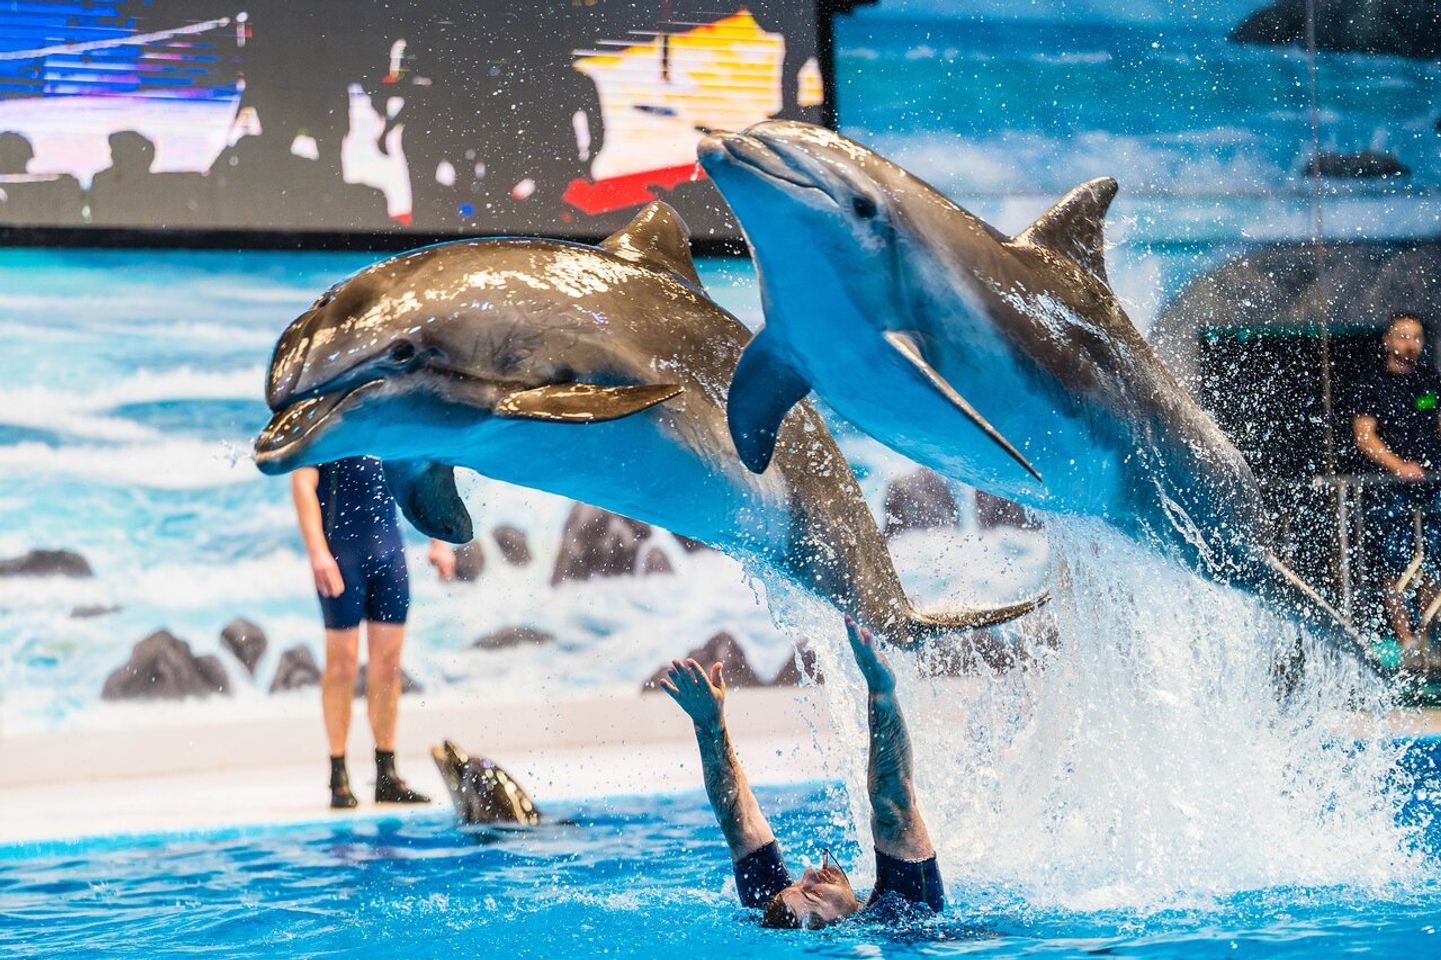 Be impressed by the popular and talented Dolphins in Dubai